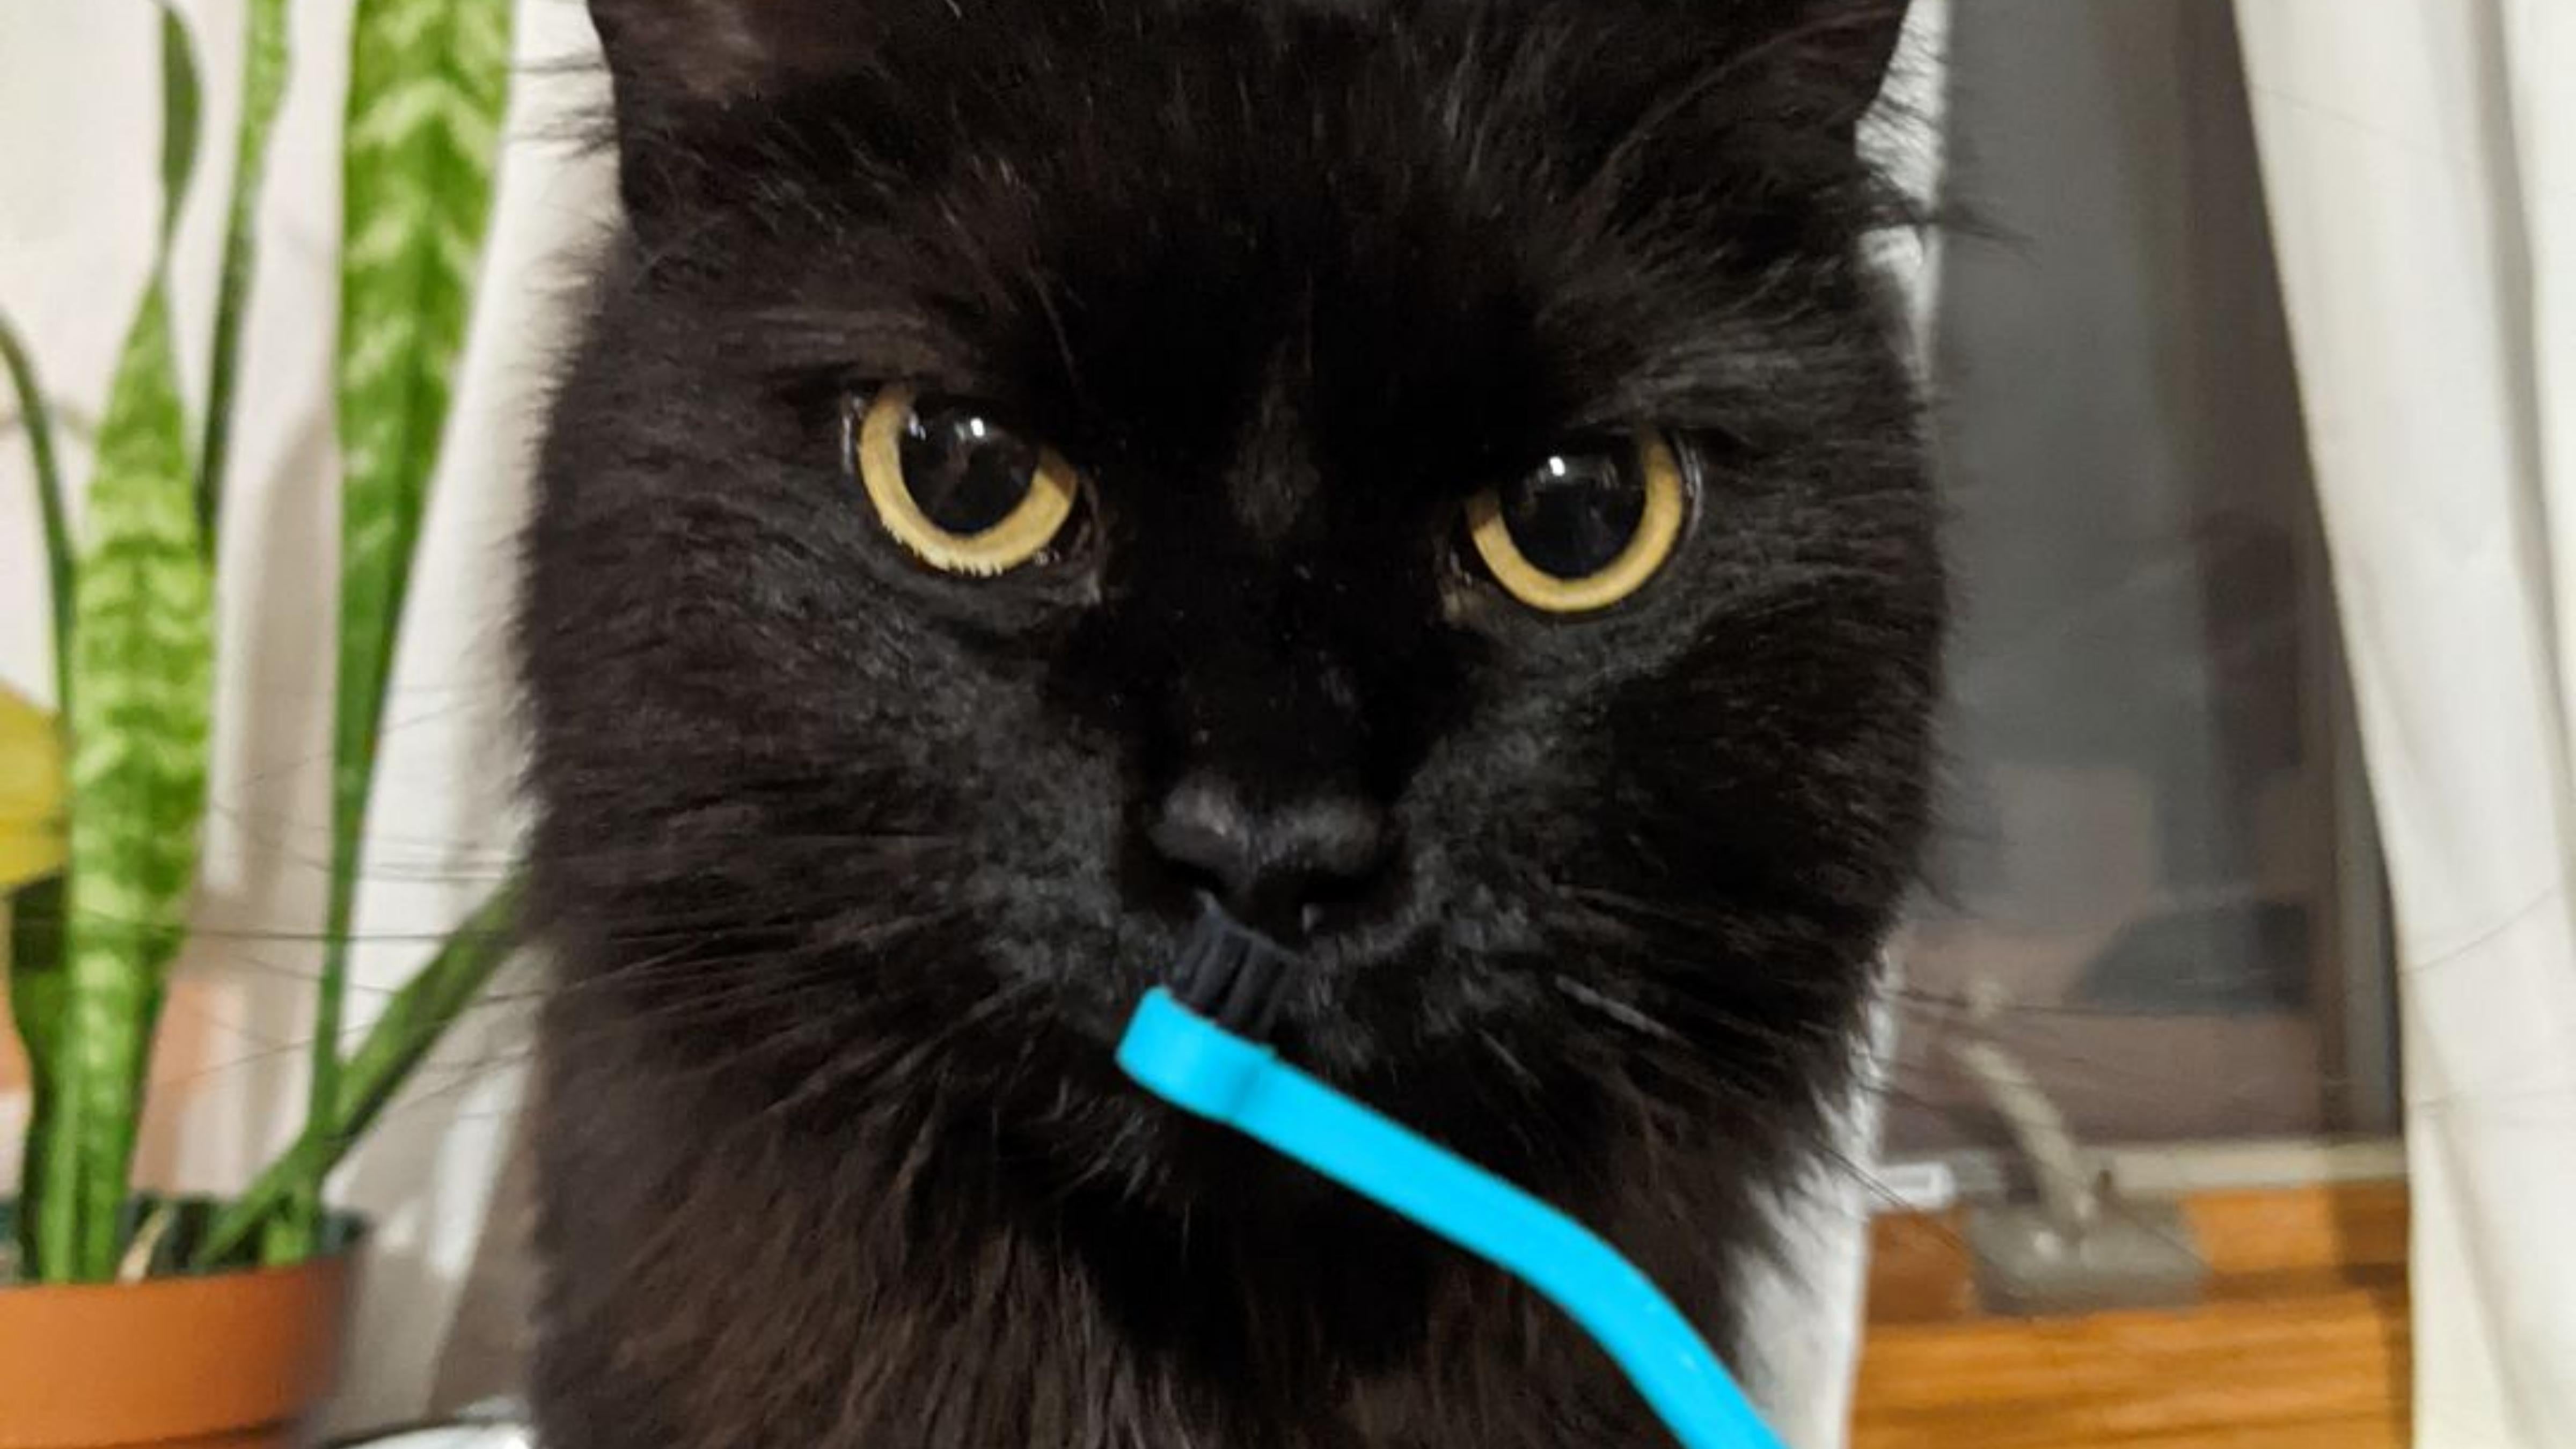 We love this toothbrush! I've started brushing my cats teeth every day and over the last 2 weeks I have seen such an improvement! The vet even said that Pandora's teeth looked great. I'm so excited to continue using this, and I can't wait for the toothpaste!